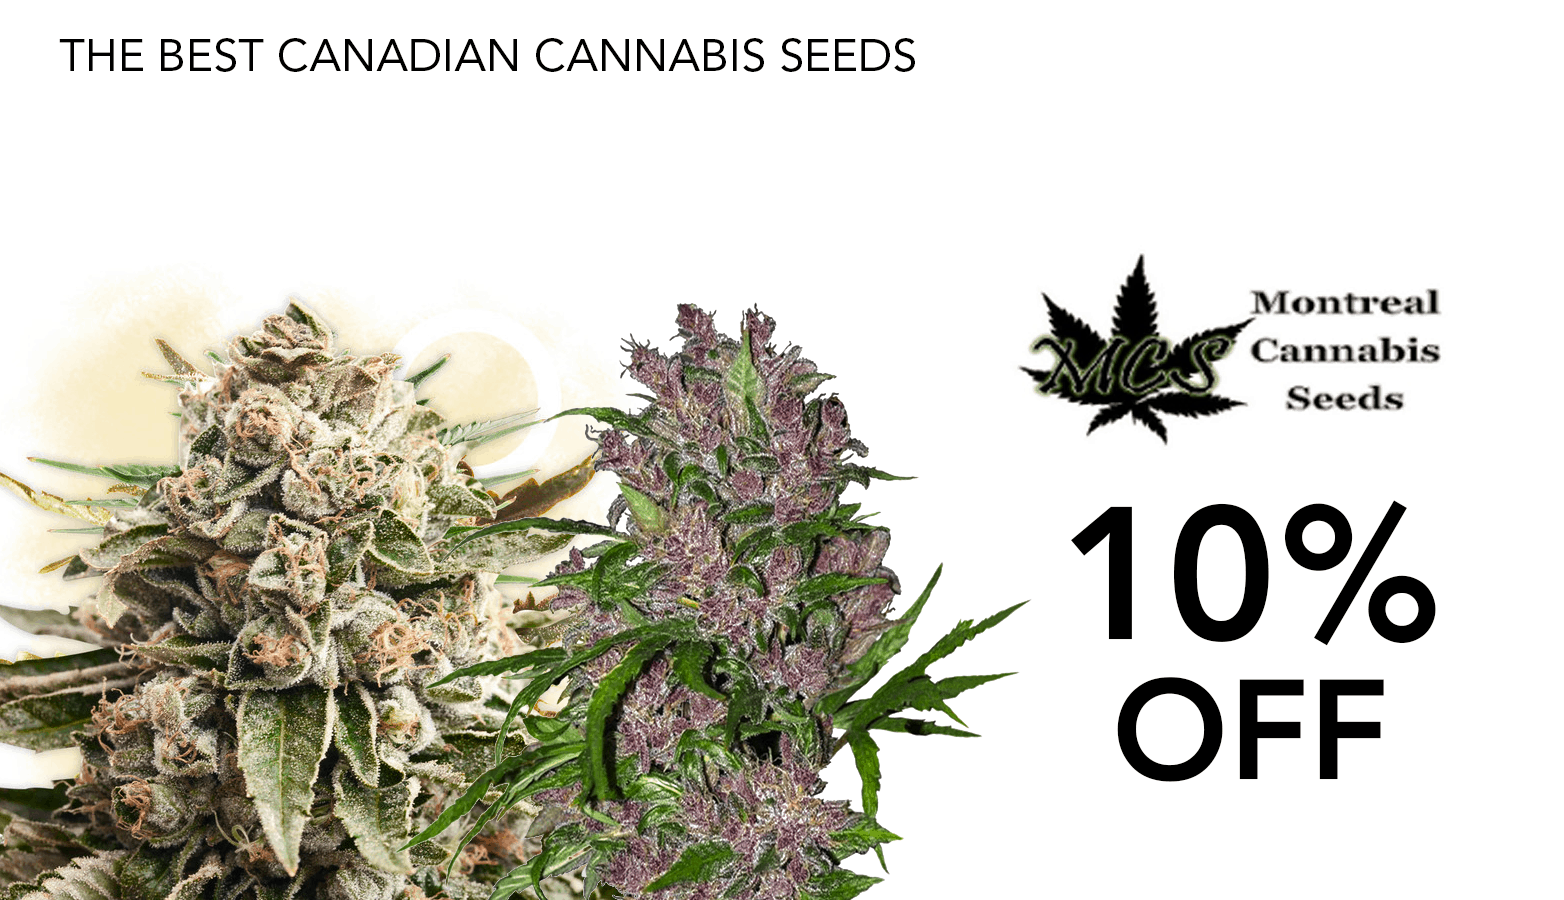 Montreal Cannabis Seeds Coupon Code Online Discount Save On Cannabis Redesign